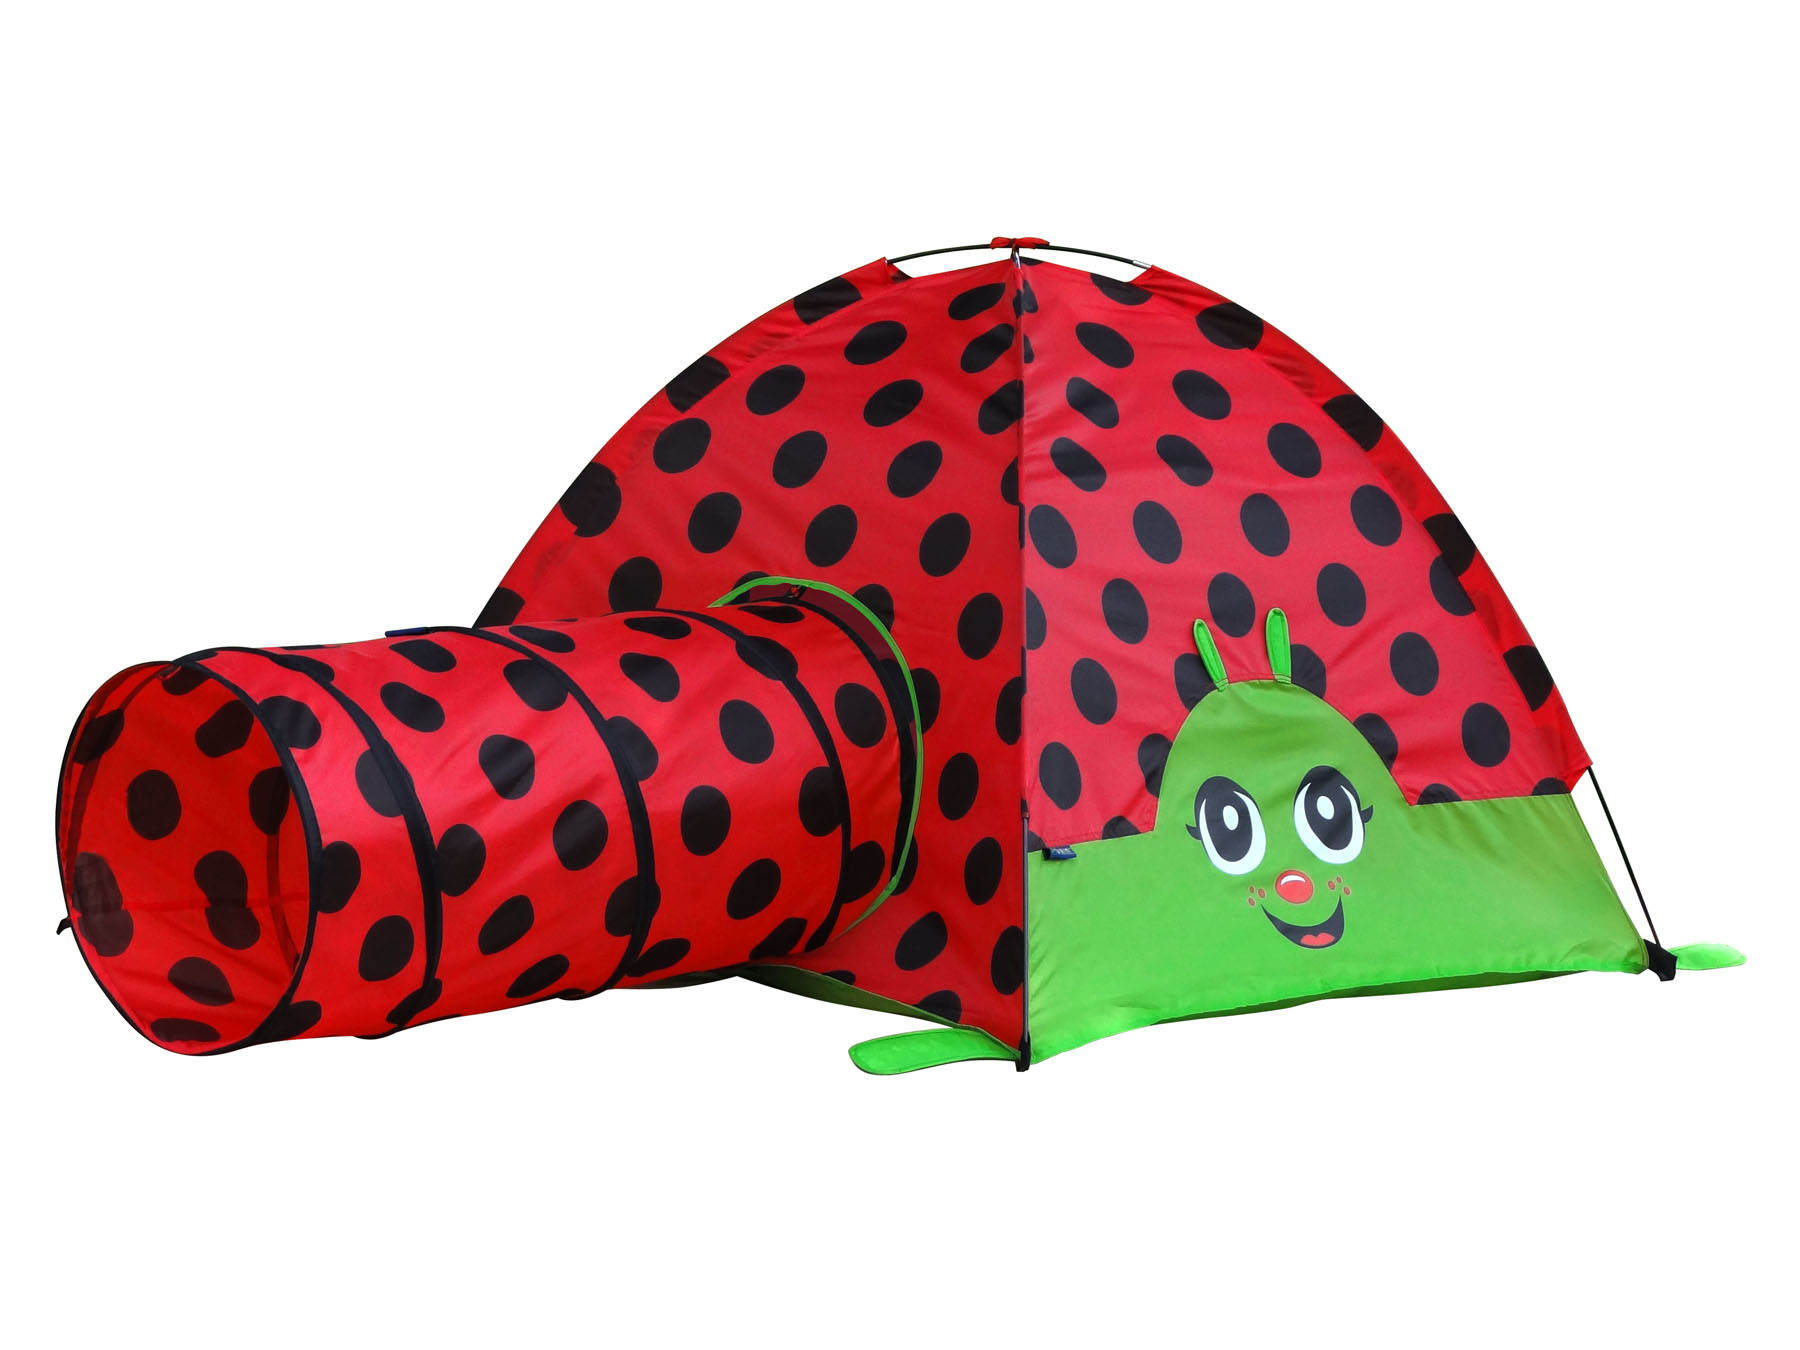 GigaTent Lady Bug Attachable Play Tunnel Fiberglass Poles Polyester Play Tent, Multi-color - image 2 of 2